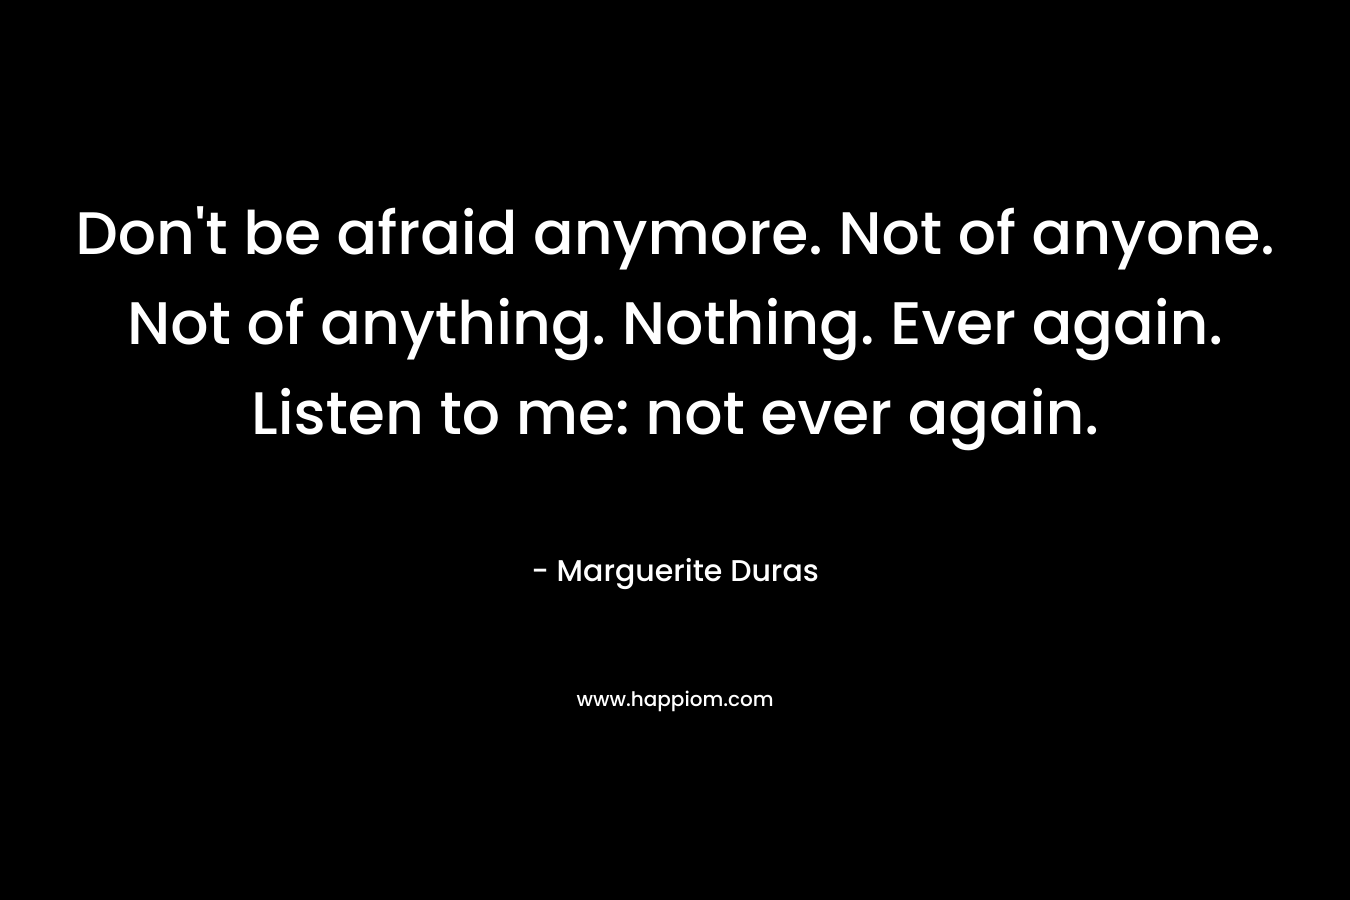 Don't be afraid anymore. Not of anyone. Not of anything. Nothing. Ever again. Listen to me: not ever again.